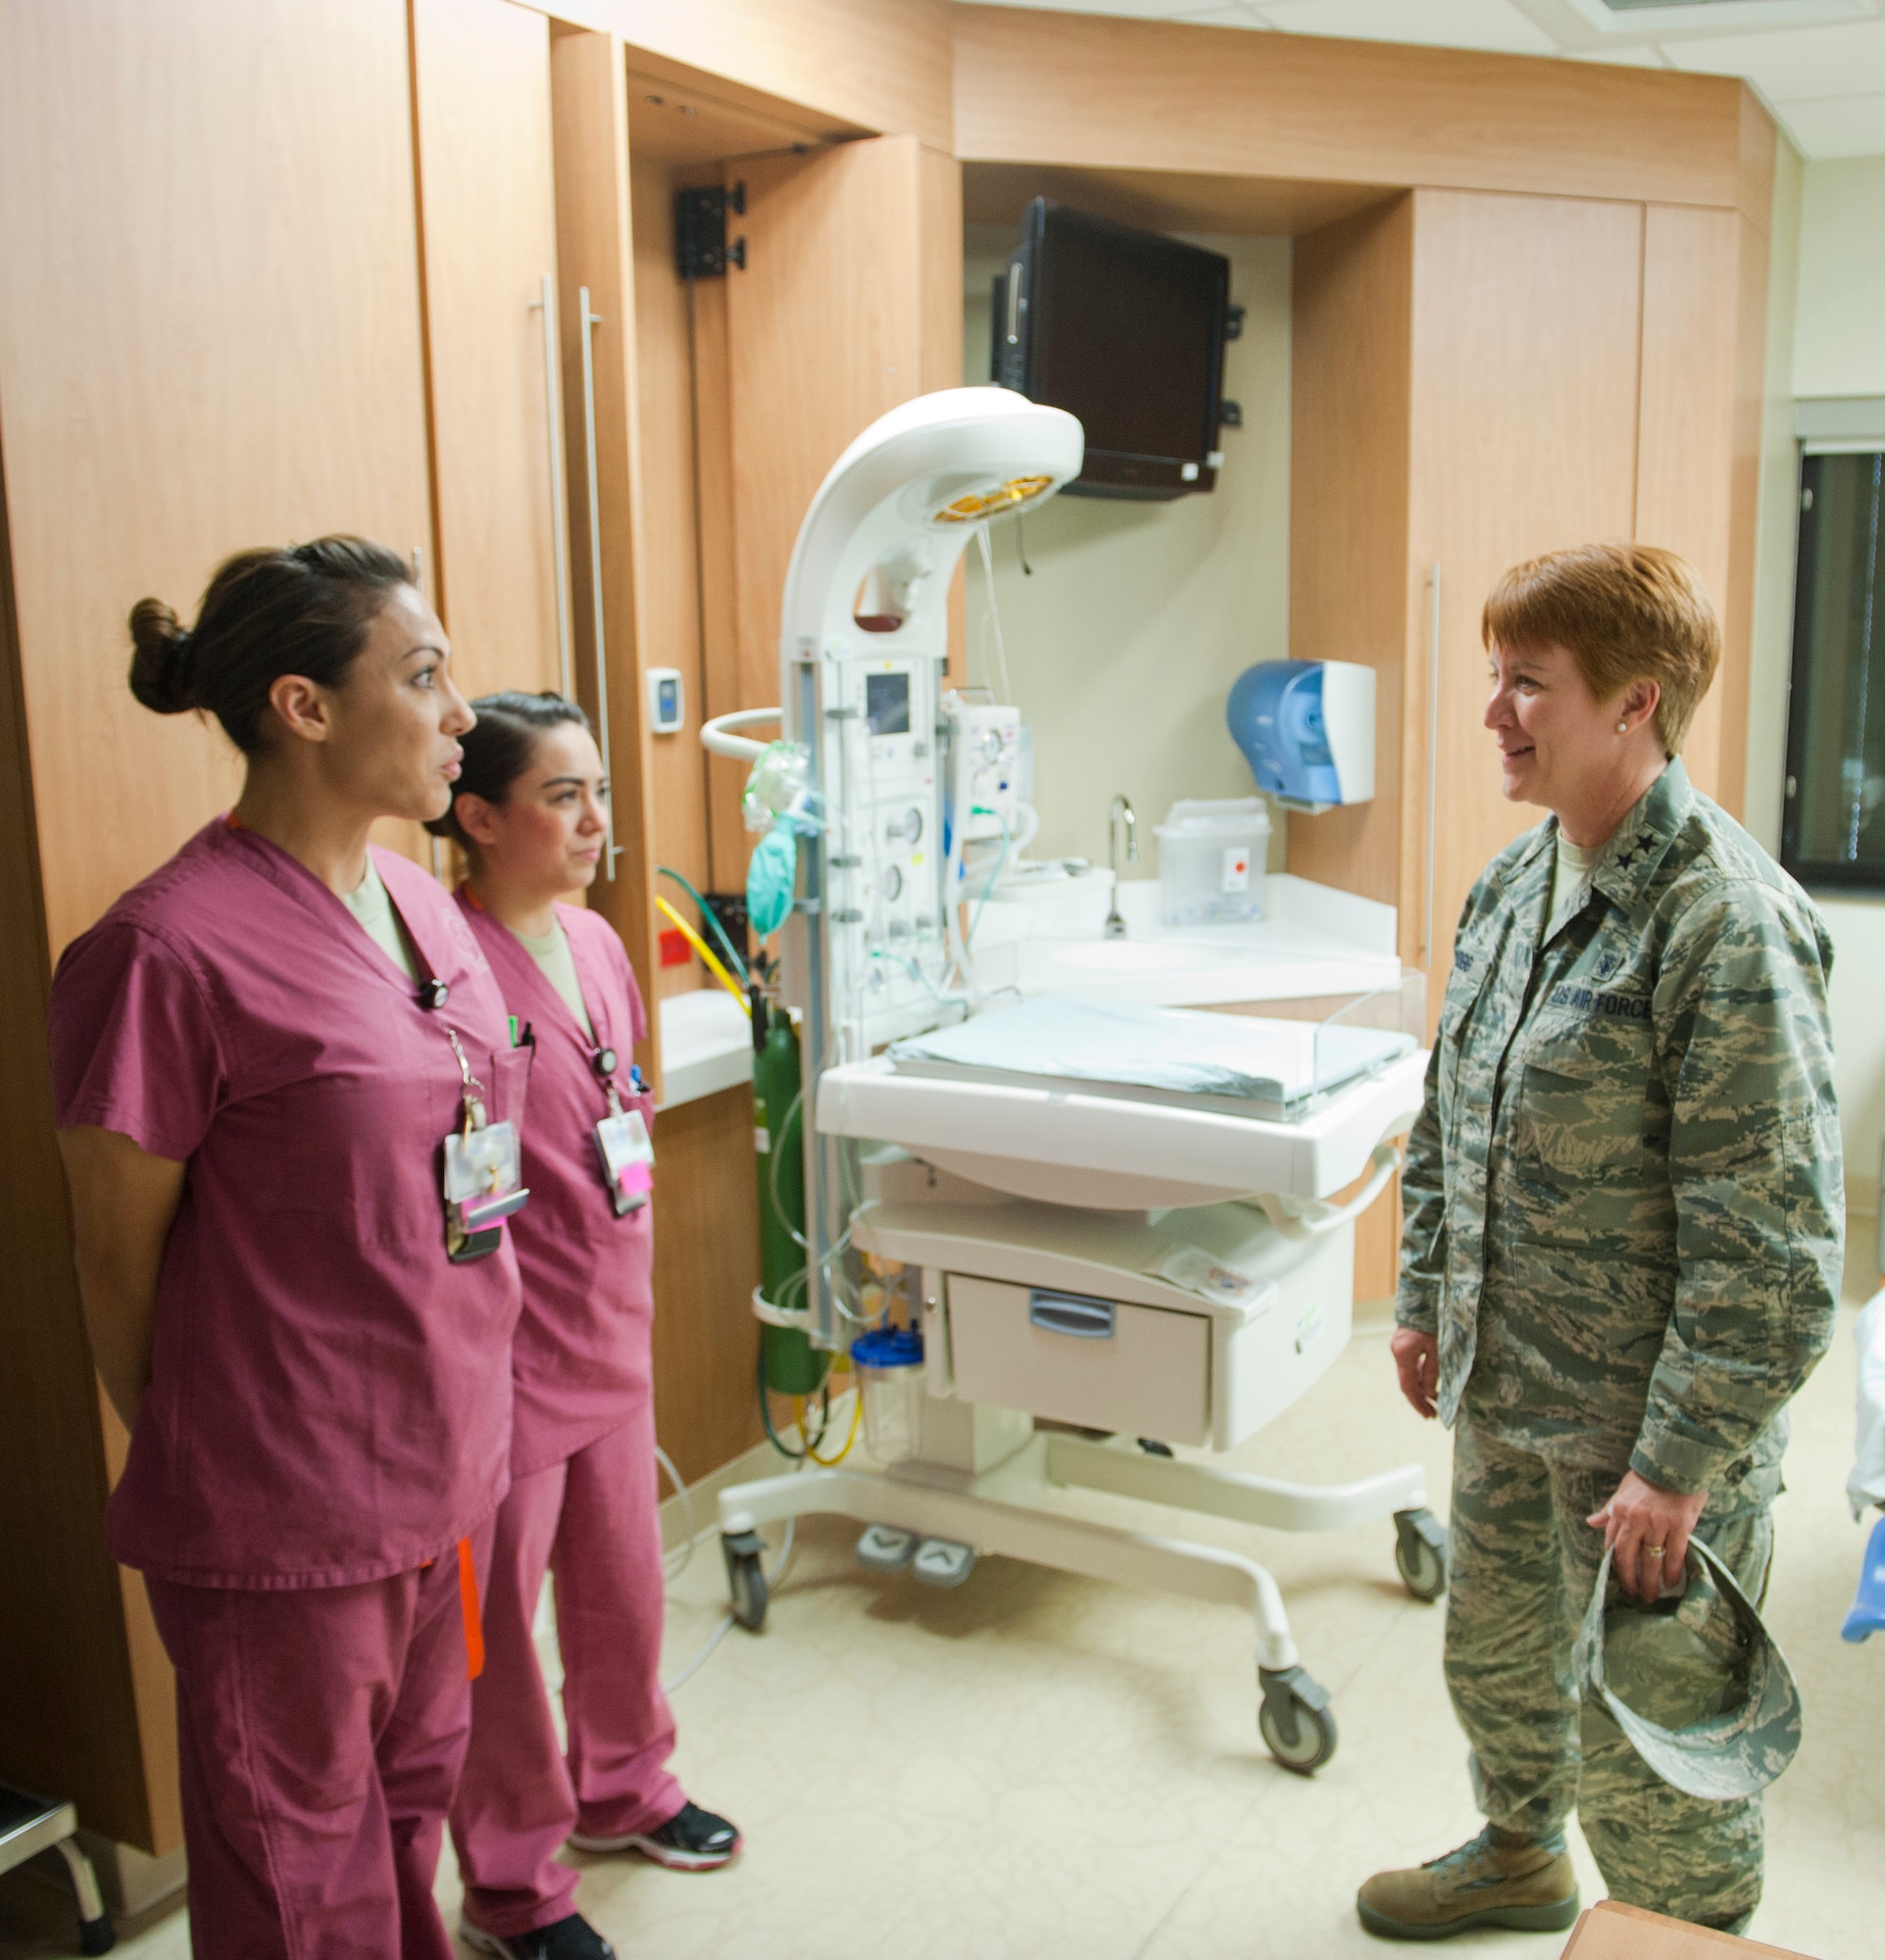 Second Lt. Theresa Jacobs-Bruner (left), 99th Inpatient Operations Squadron labor and delivery nurse, and Senior Airman Kayla Mills (center), 99th IPTS labor and delivery technician, brief Maj. Gen. Dorothy Hogg, U.S. Air Force director of medical operations and research and chief of the nurse corps, on the operations and capabilities of the labor and delivery ward at the Mike O’Callaghan Federal Medical Center, Nellis Air Force Base, Nev., Jan. 13, 2015. Hogg was visiting Nellis and the nearby University Medical Center of Southern Nevada to discuss the benefits of the Sustained Medical and Readiness Trained, or SMART, program. (U.S. Air Force photo illustration by Senior Airman Thomas Spangler) 